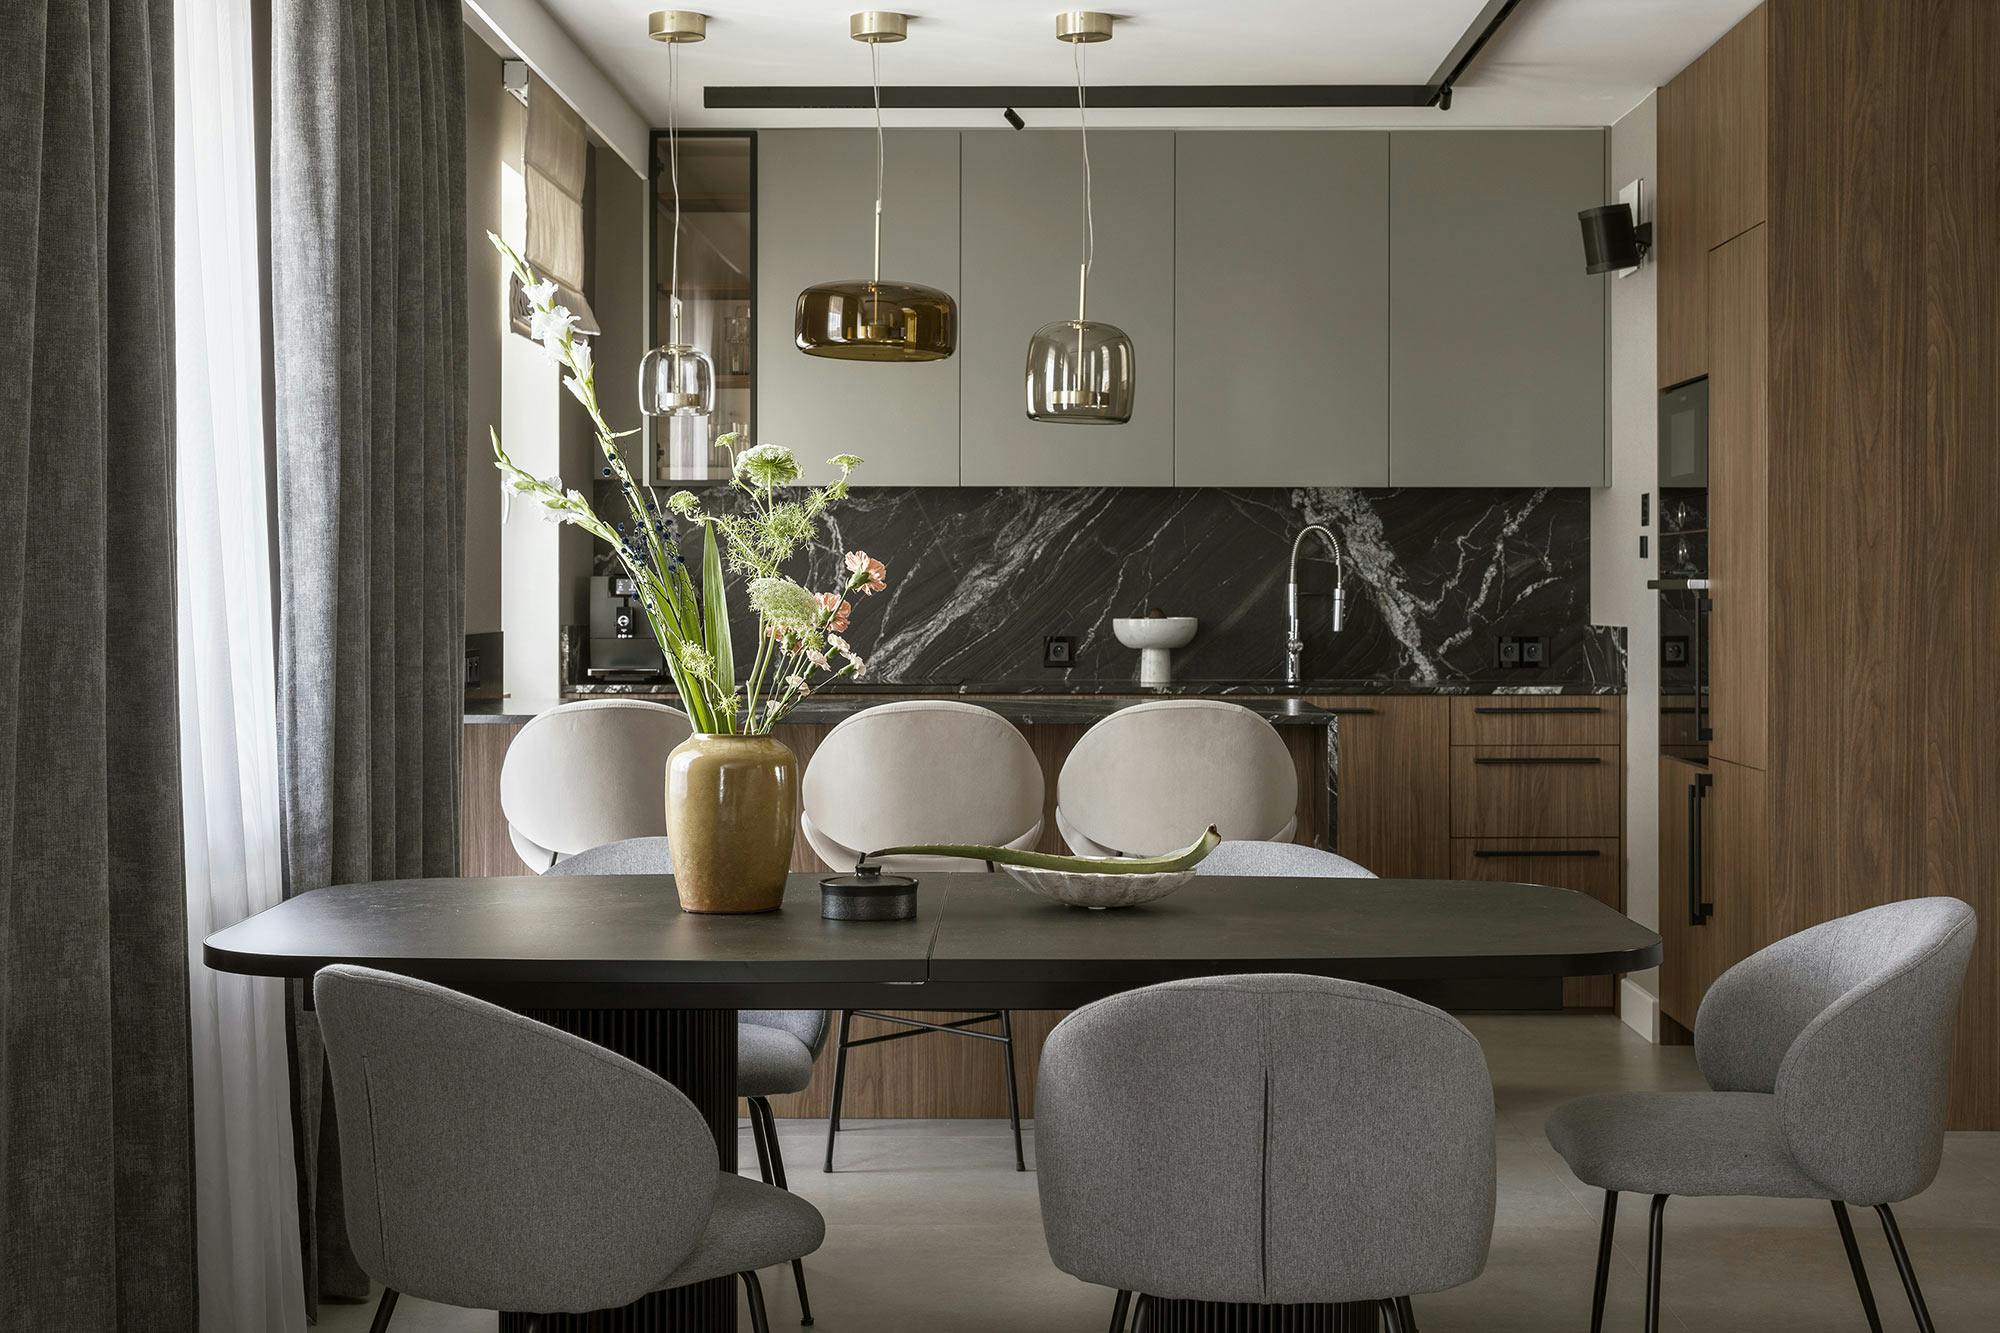 Numéro d'image 43 de la section actuelle de Cosentino’s natural stone defines the finishes and style of this renovated flat in Madrid’s Salamanca neighbourhood de Cosentino France